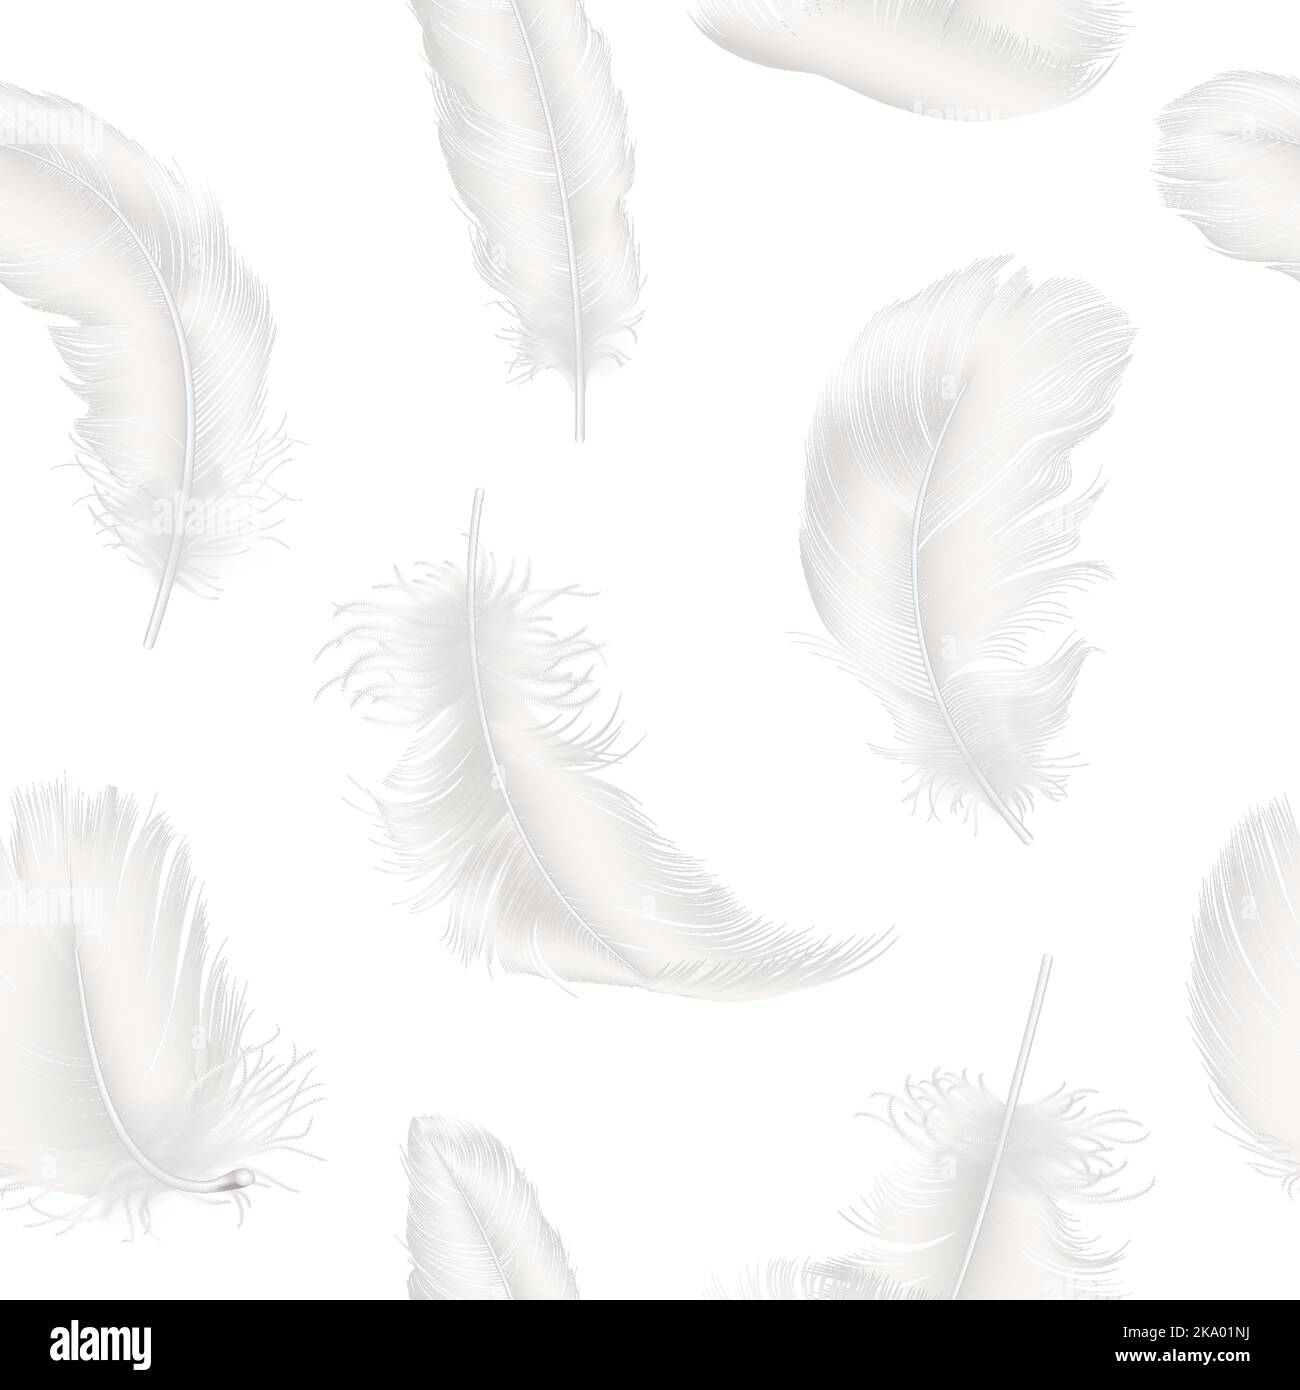 Realistic Feathers White Bird Falling Feather Isolated On White Background  Vector Collection Illustration Of Feather Bird Soft White Plume Stock  Illustration - Download Image Now - iStock